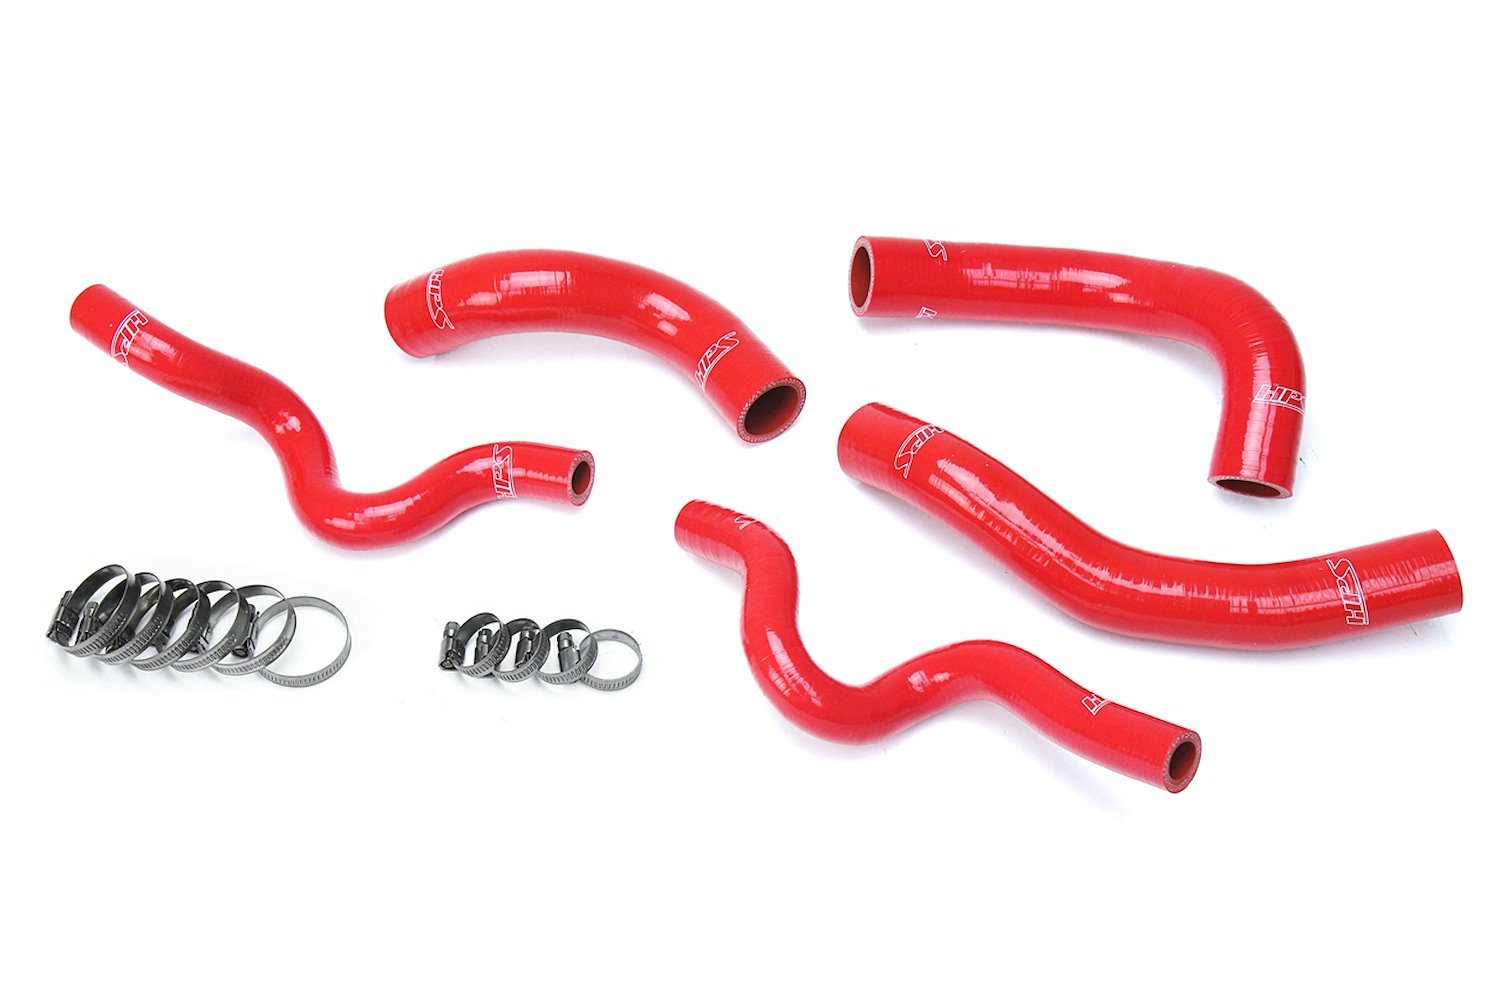 57-1630-RED Radiator Hose Kit, High-Temp 3-Ply Reinforced Silicone, Replace OEM Rubber Radiator Coolant Hoses